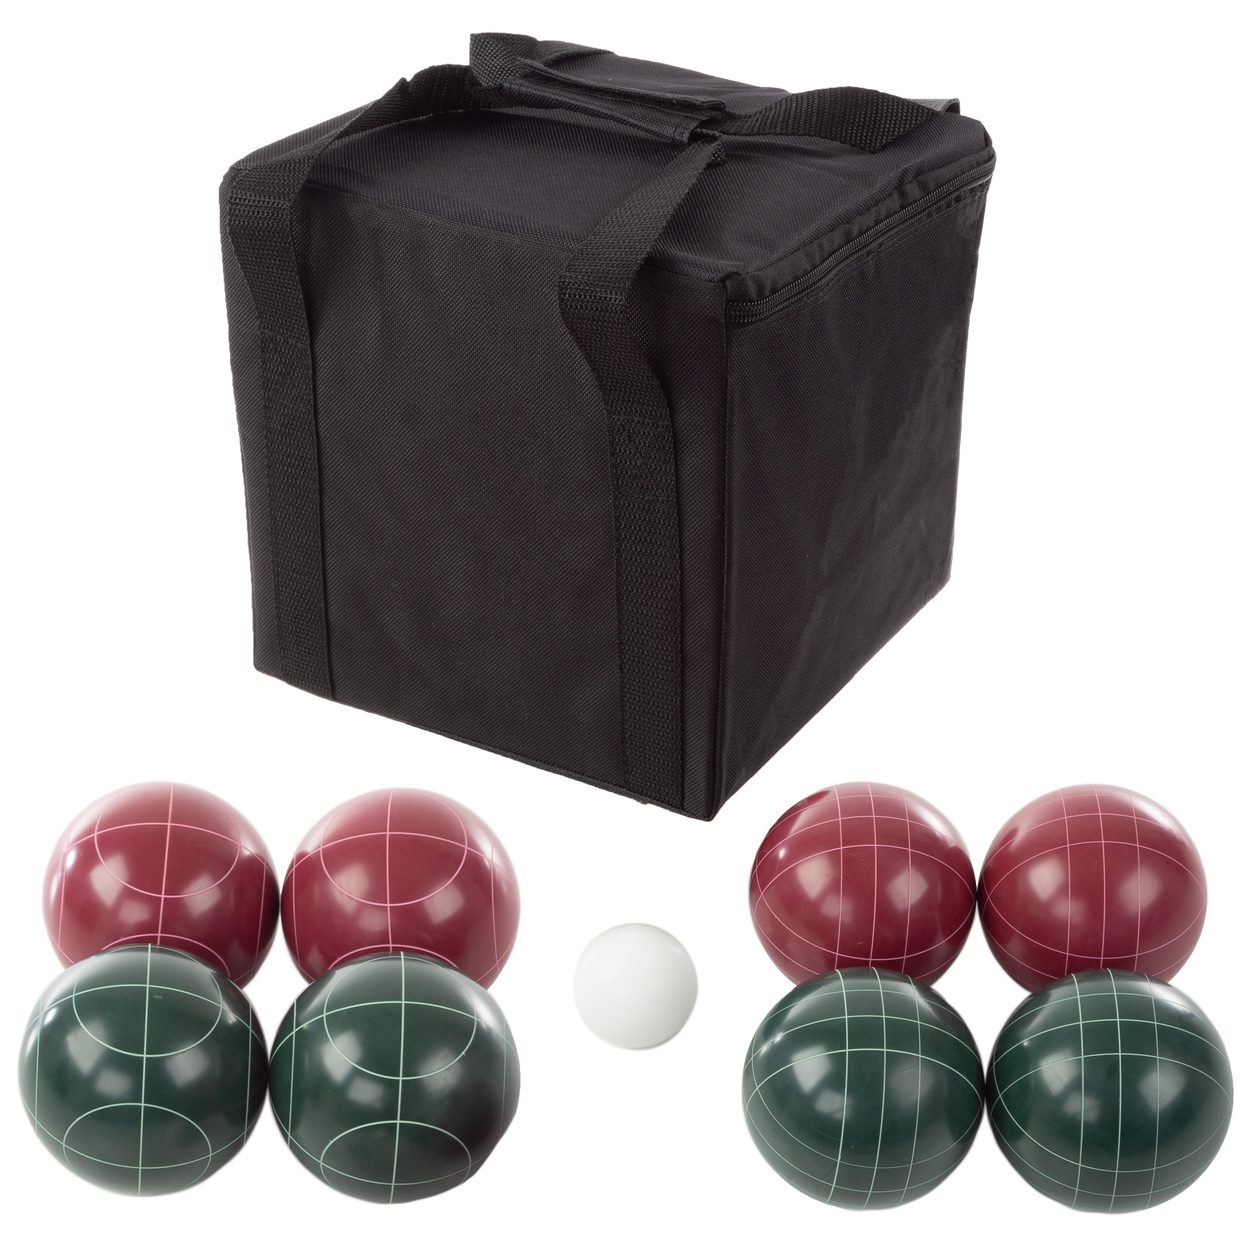 Bocce Ball Set Regulation Outdoor Family Bocce Game For Backyard Lawn